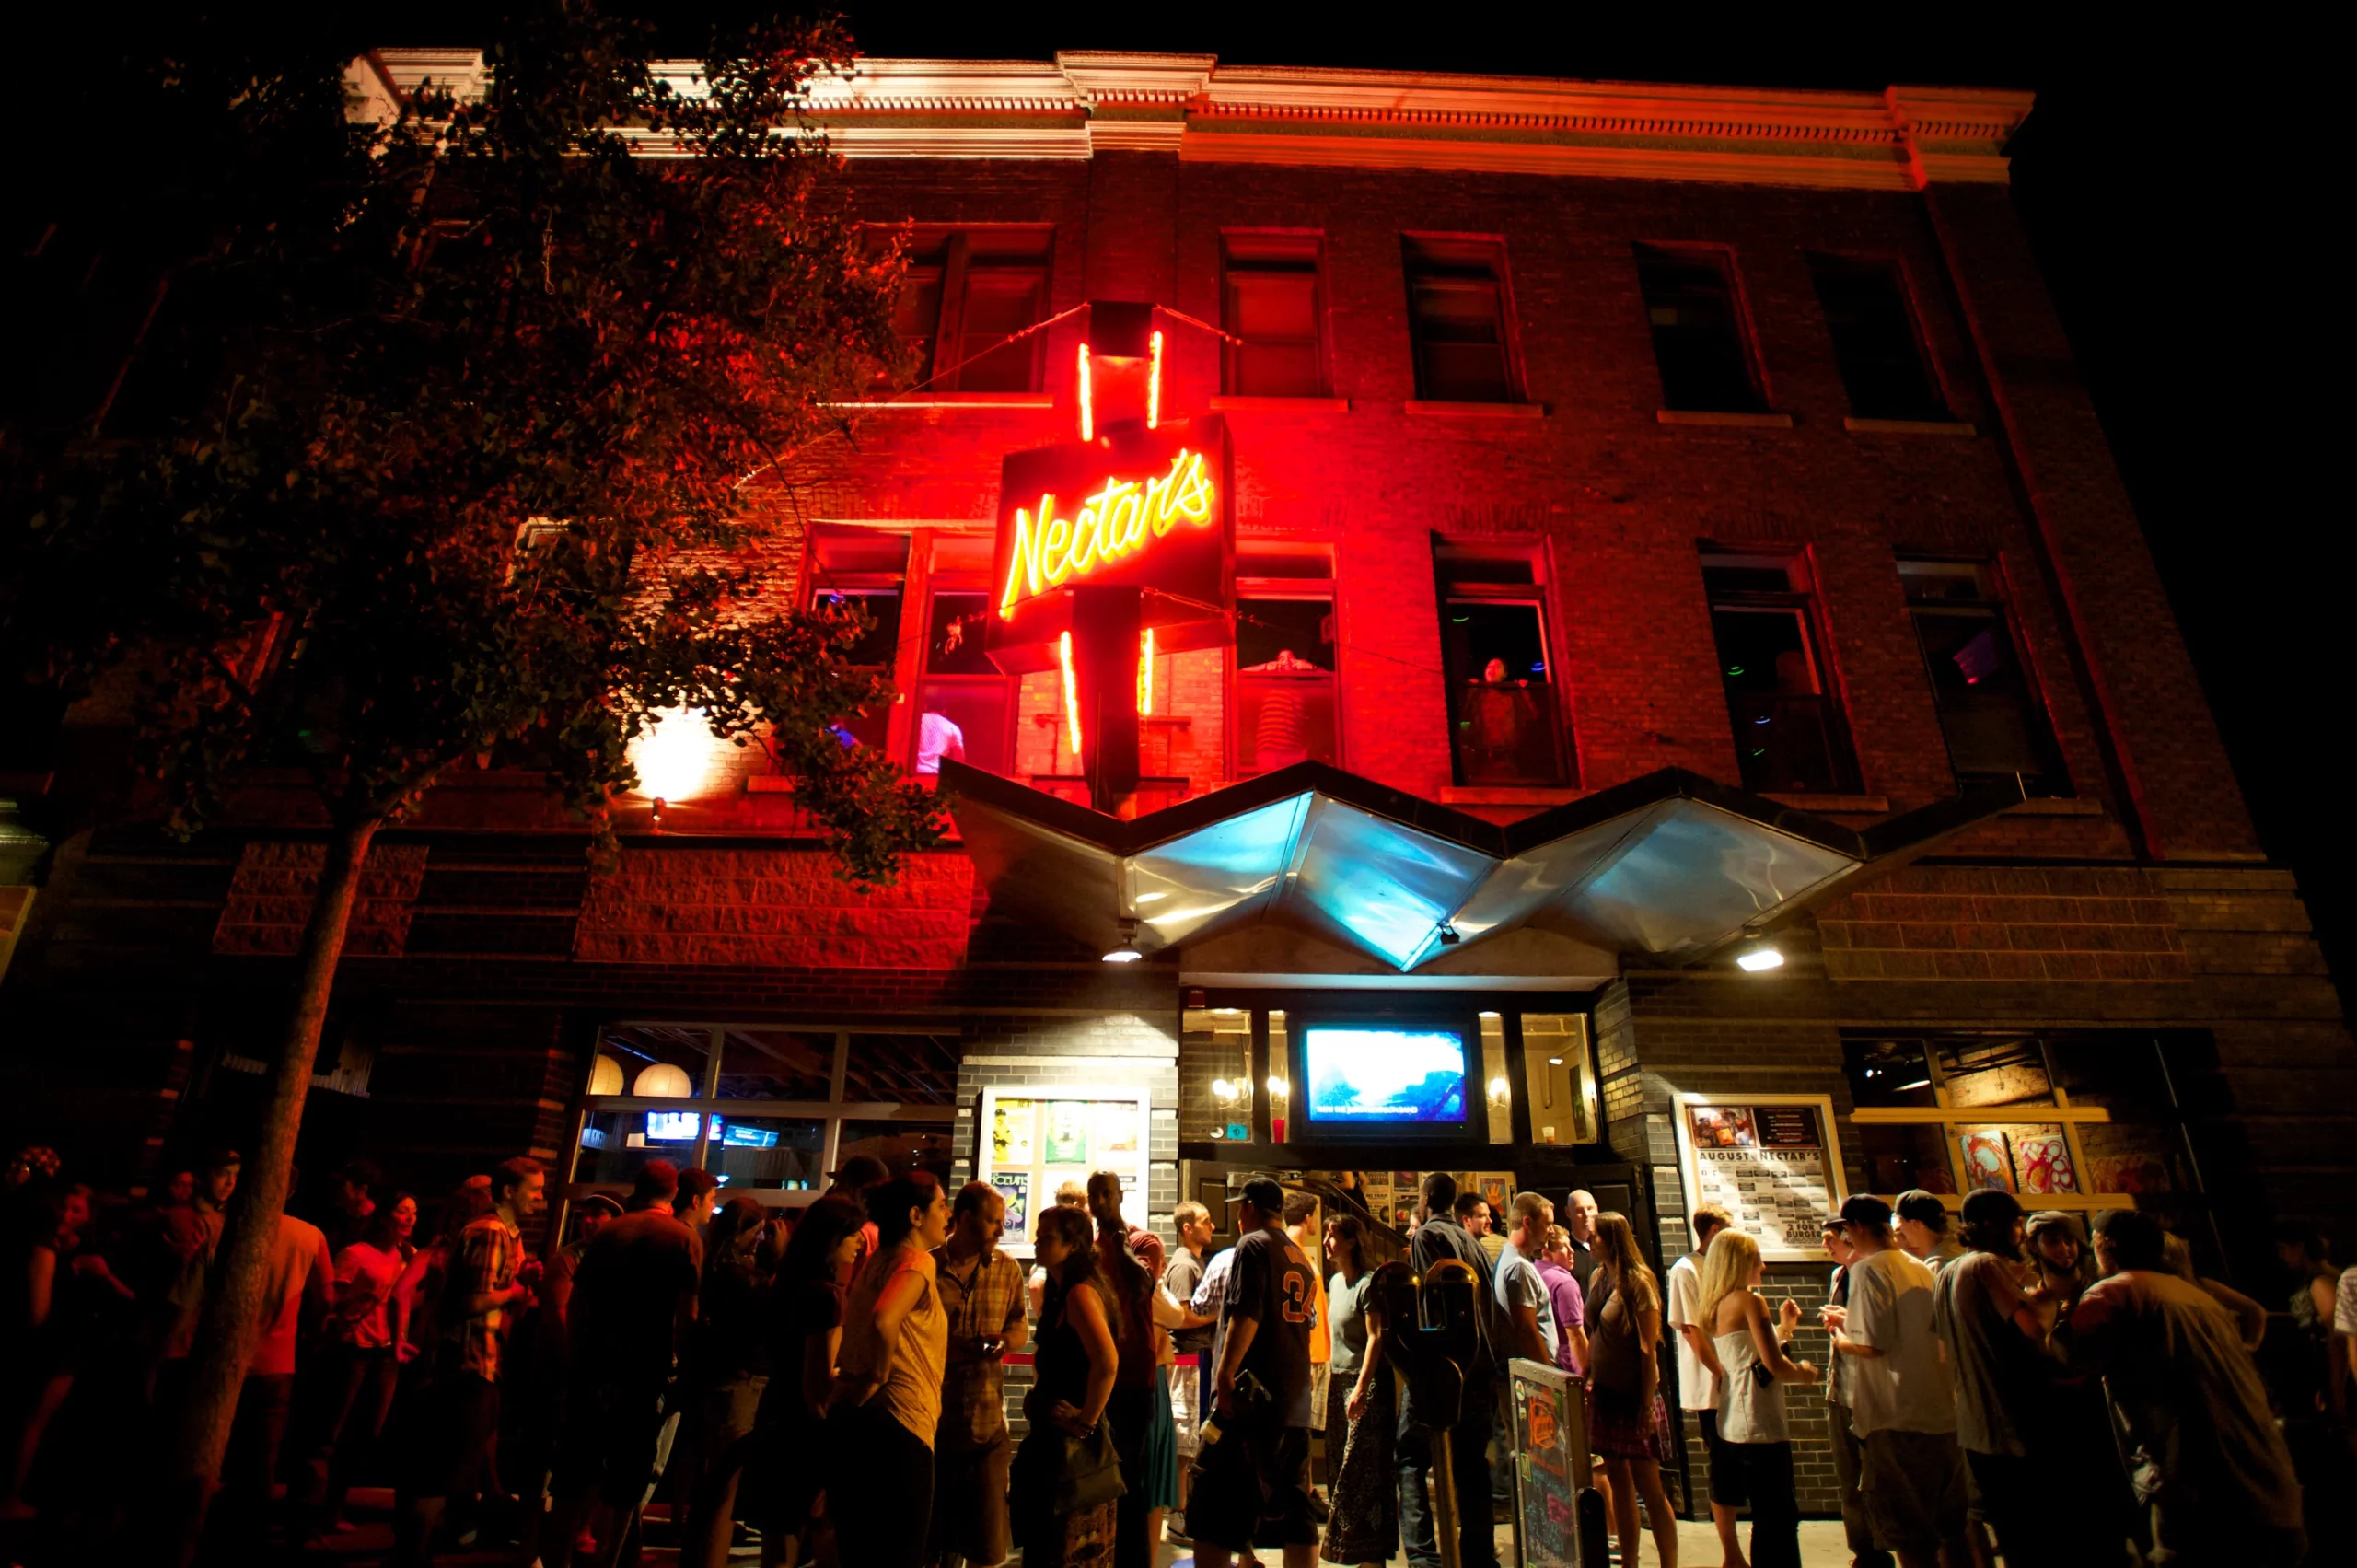 Nectar's - Outside Crowd at Night with Neon Sign